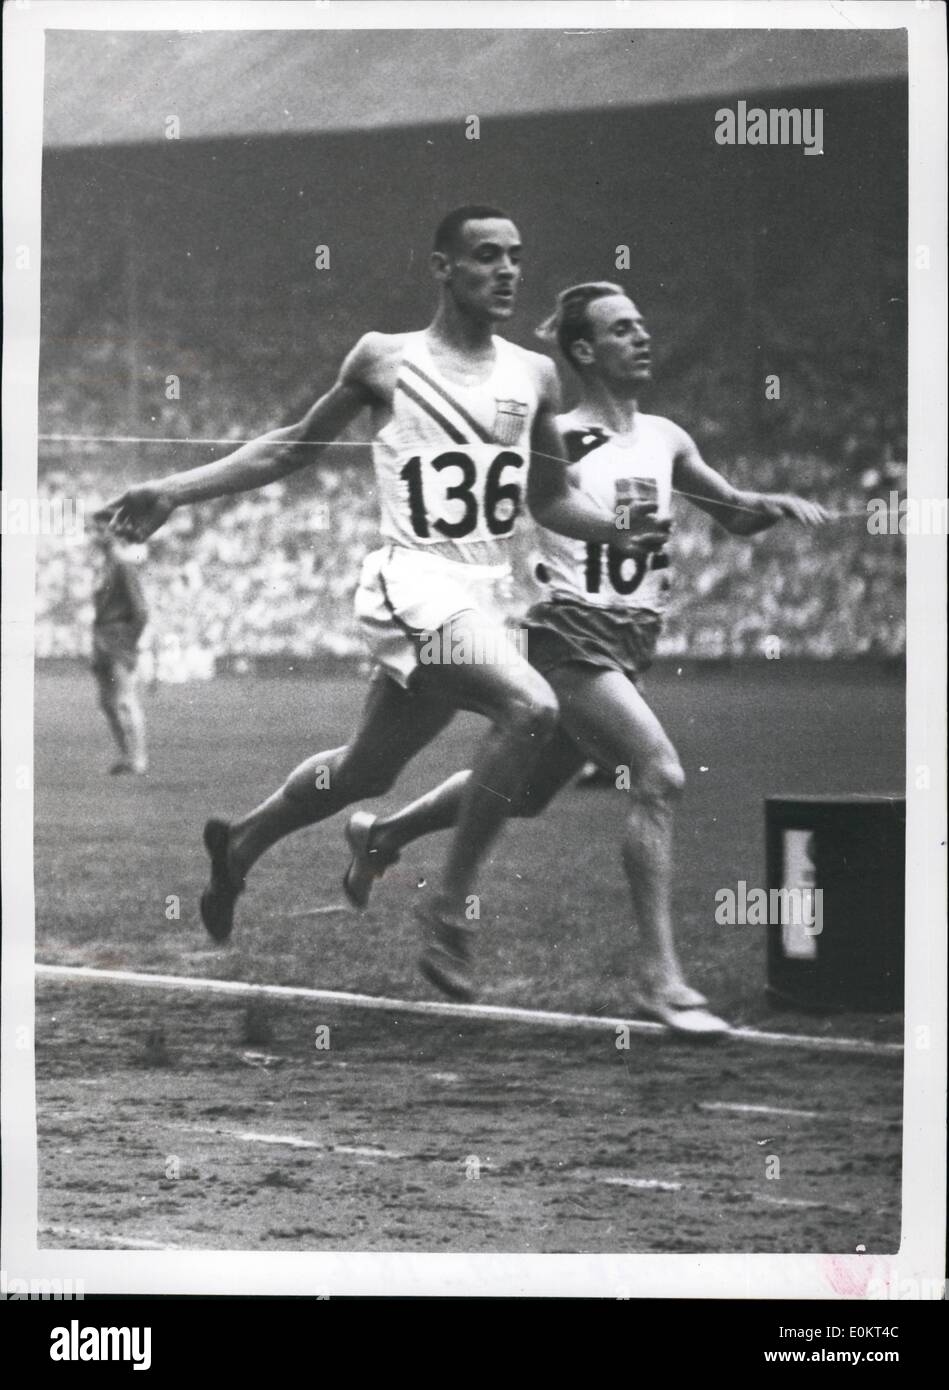 Jul. 07, 1948 - First Round - Beat  - 800 metres: Photo shows M.G. Malvin Whitfield (U.S.A.) winning Heat 6 - First round 800 metres, from Y.Oivind Bengtsson (Sweden) and J.W.M. Hutchins () at Worbley Stadium, this afternoon. Stock Photo